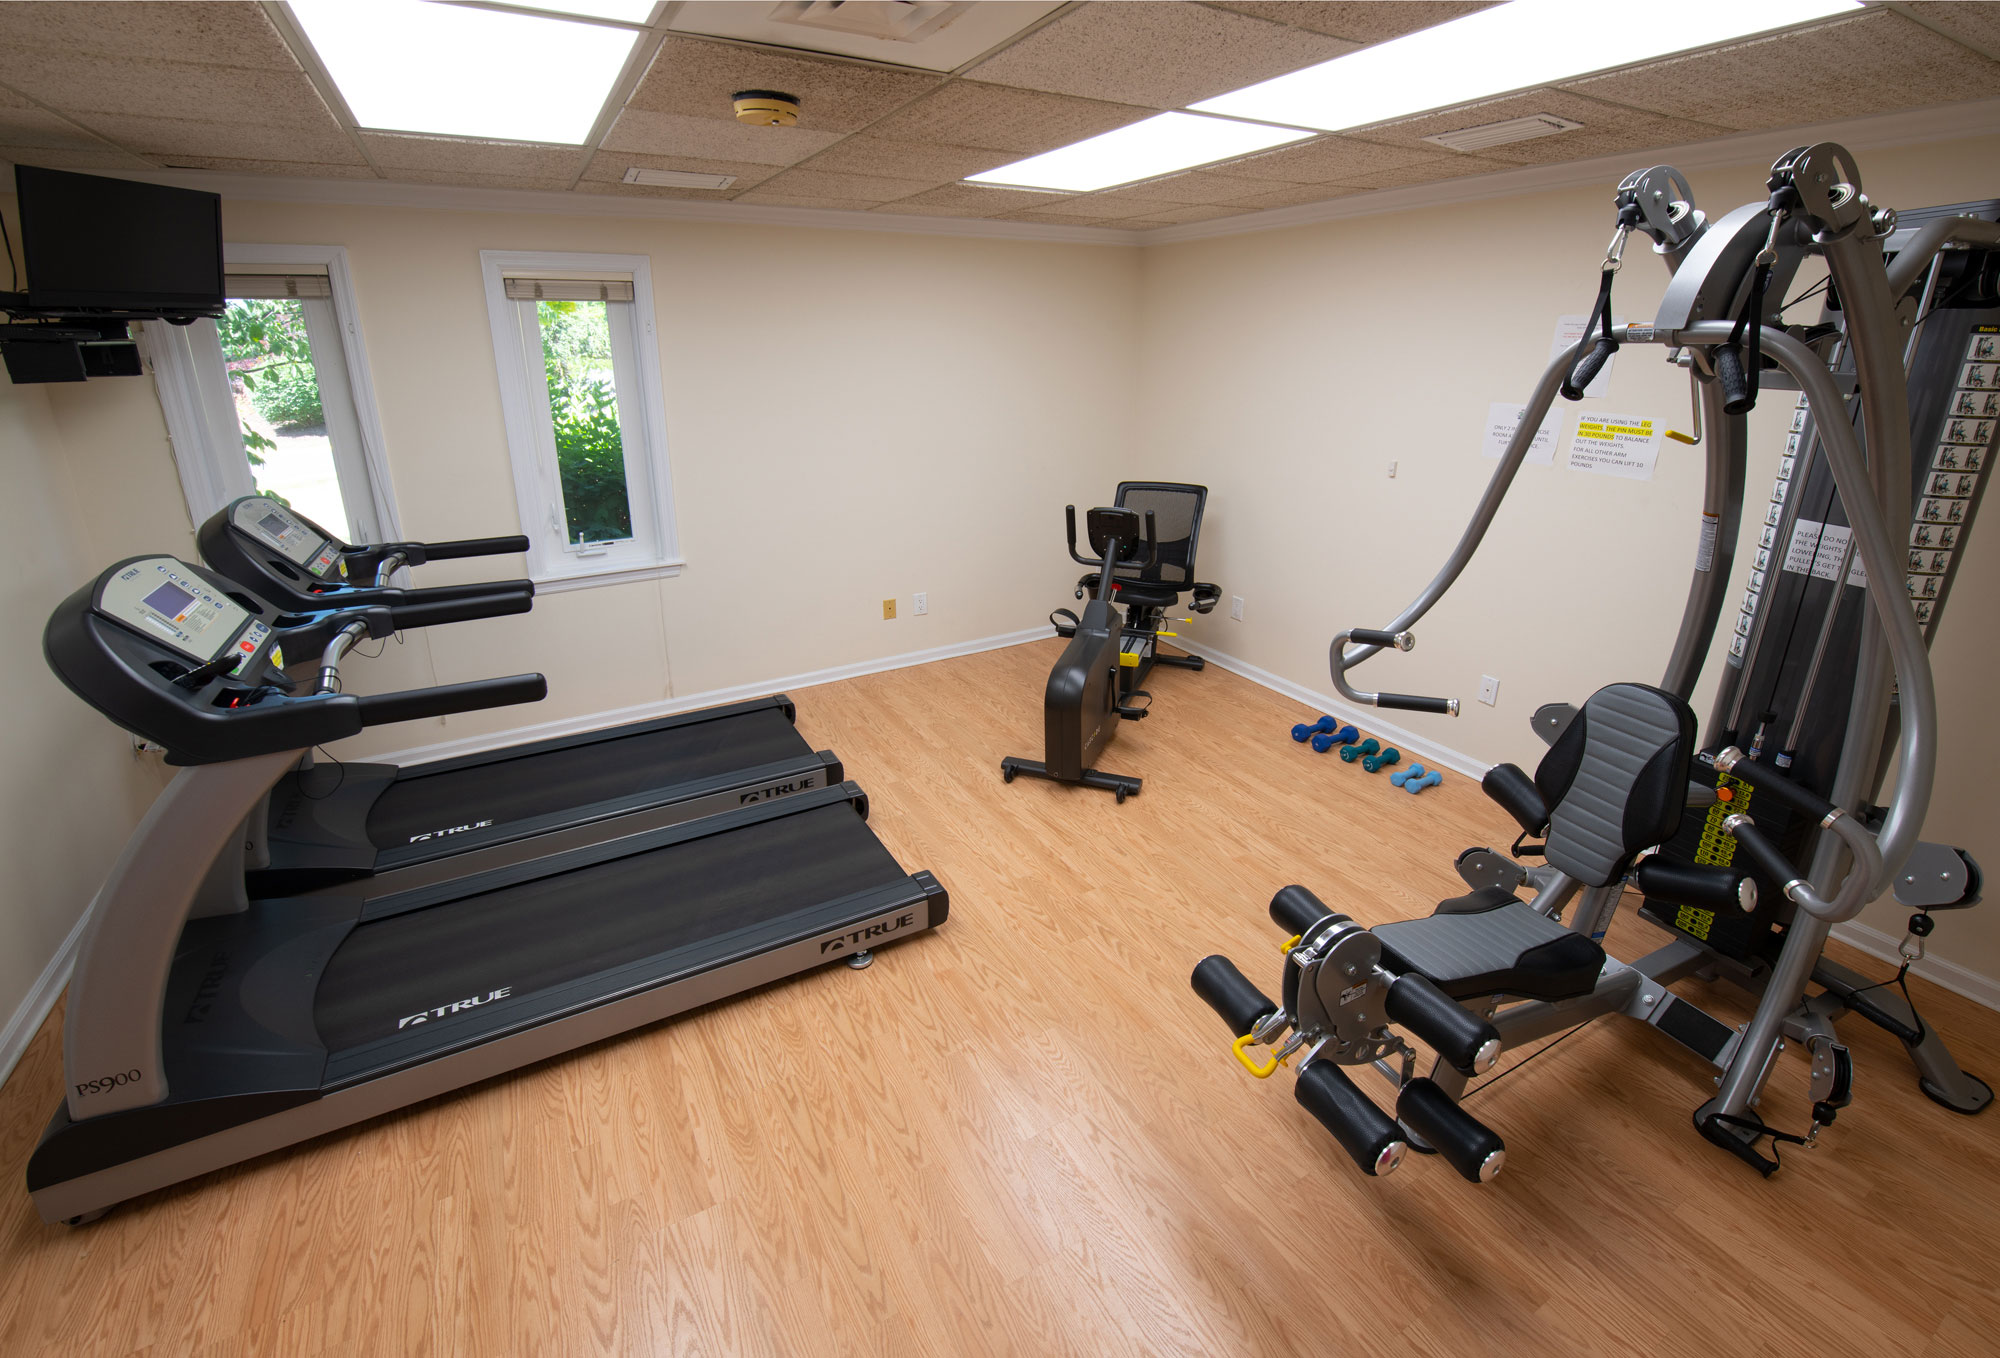 Cloverleaf-Estates-West_Fitness-Room-Clubhouse